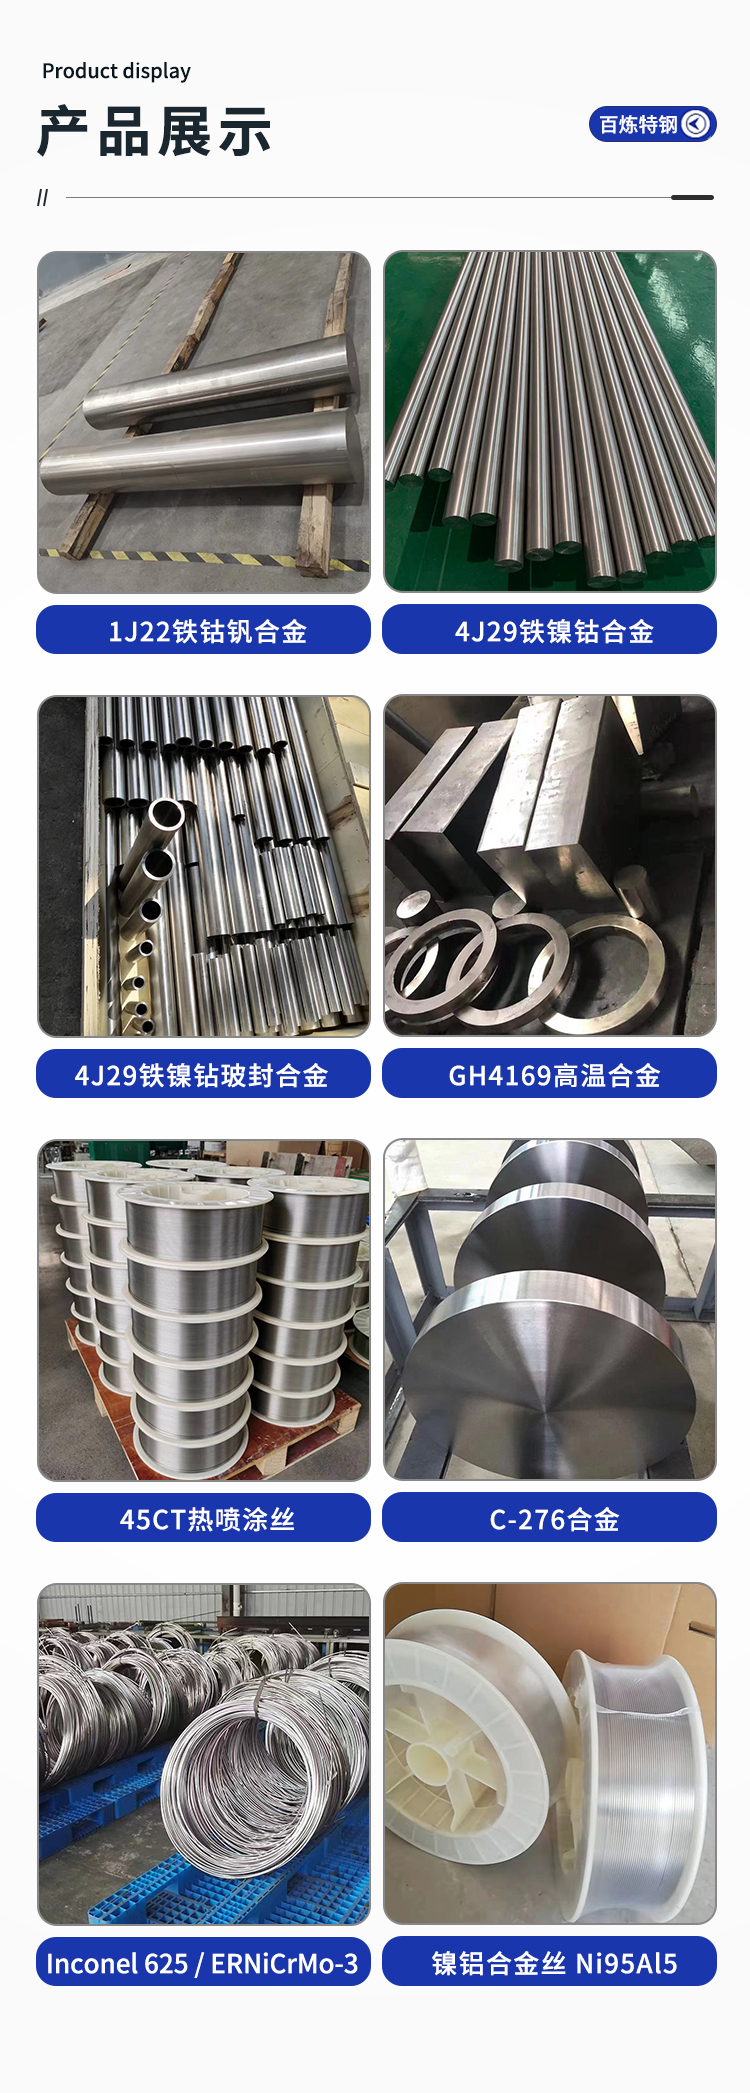 4J32 and 4J36 low expansion alloys are used to manufacture instrument parts with high precision requirements for size